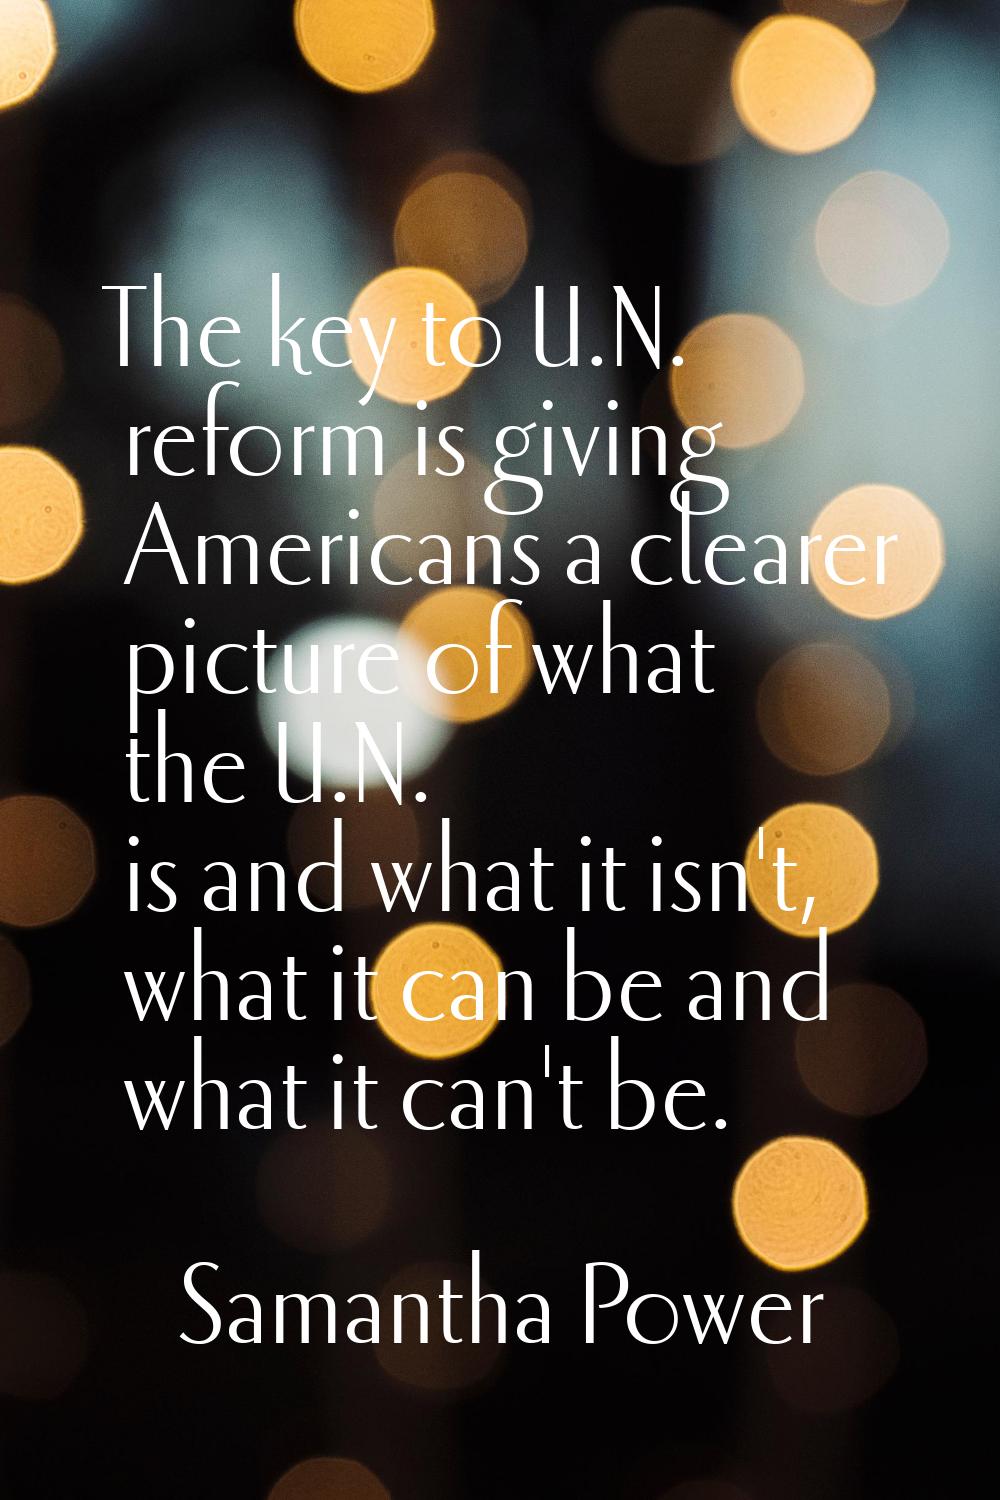 The key to U.N. reform is giving Americans a clearer picture of what the U.N. is and what it isn't,